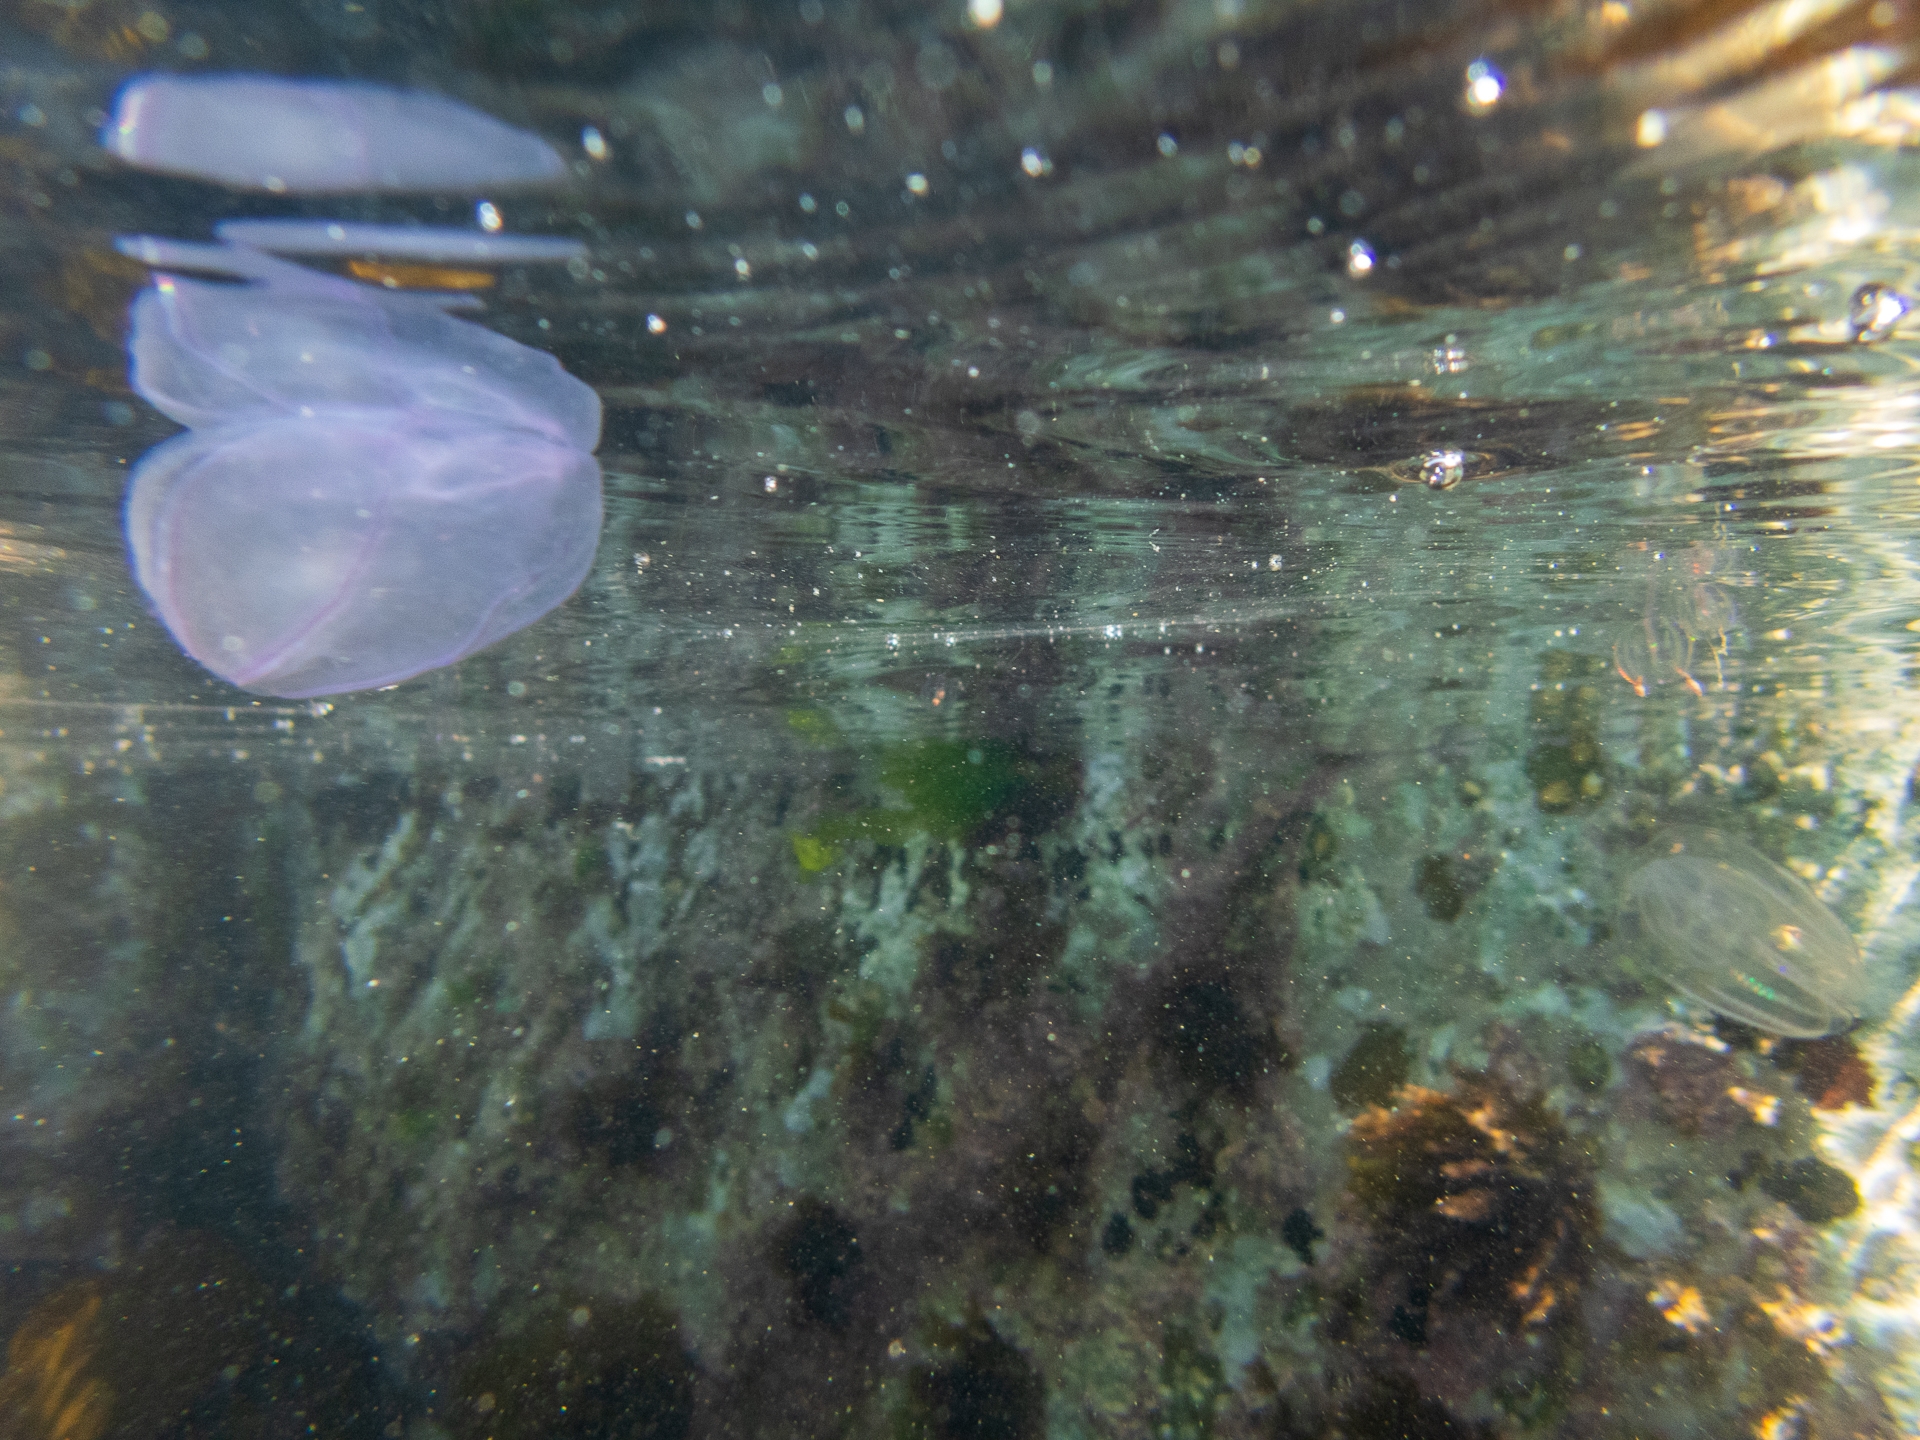 Comb Jelly (with some Gooseberry's in the background). Note the bioluminescence